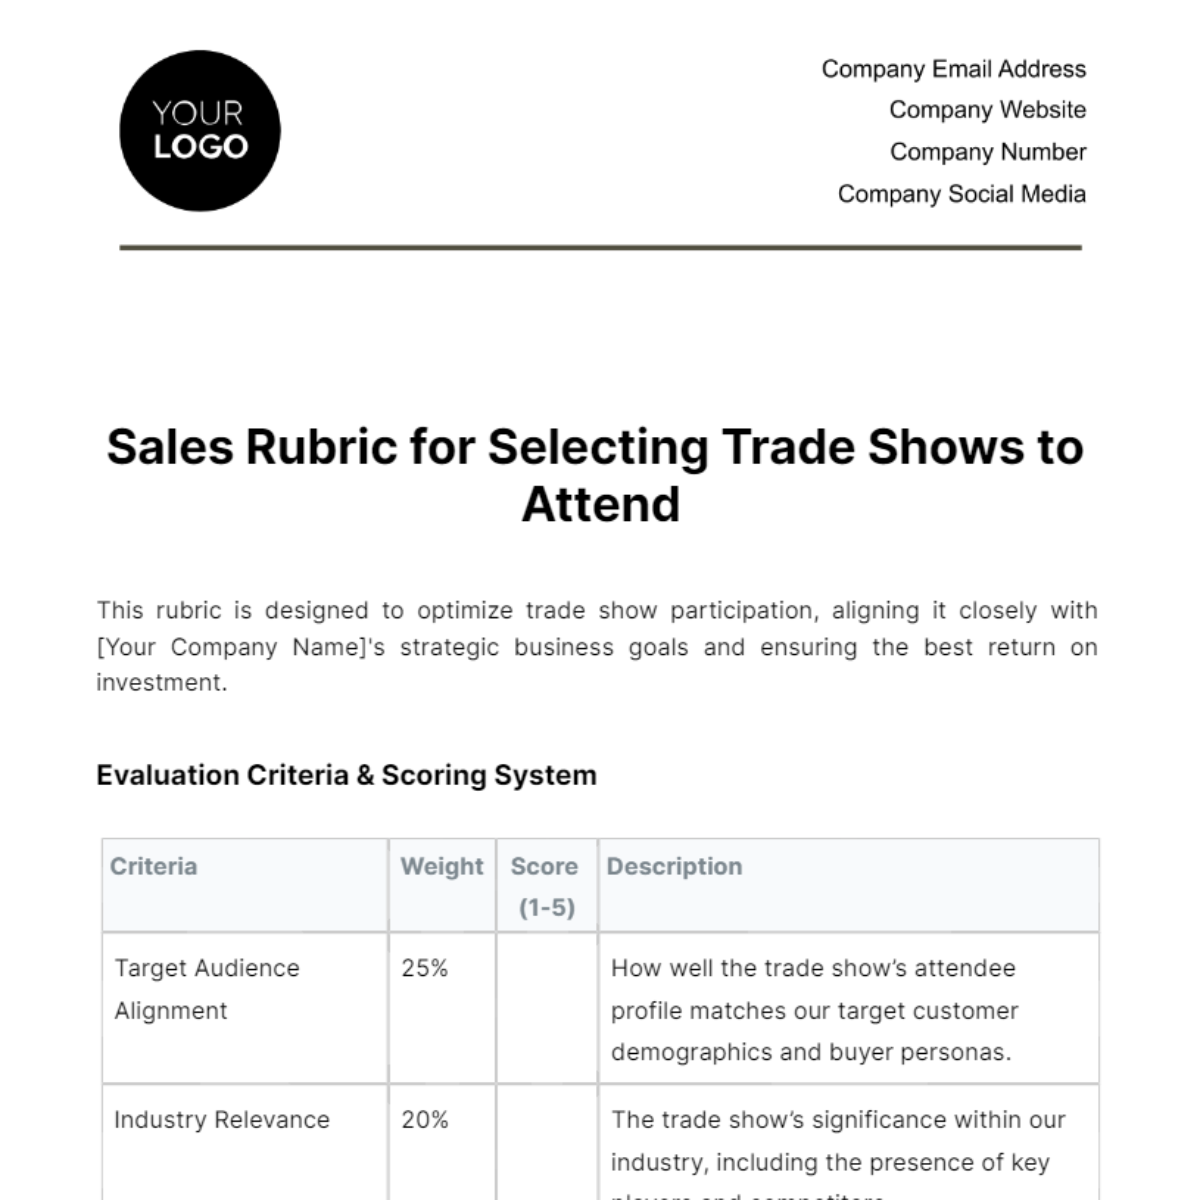 Free Sales Rubric for Selecting Trade Shows to Attend Template